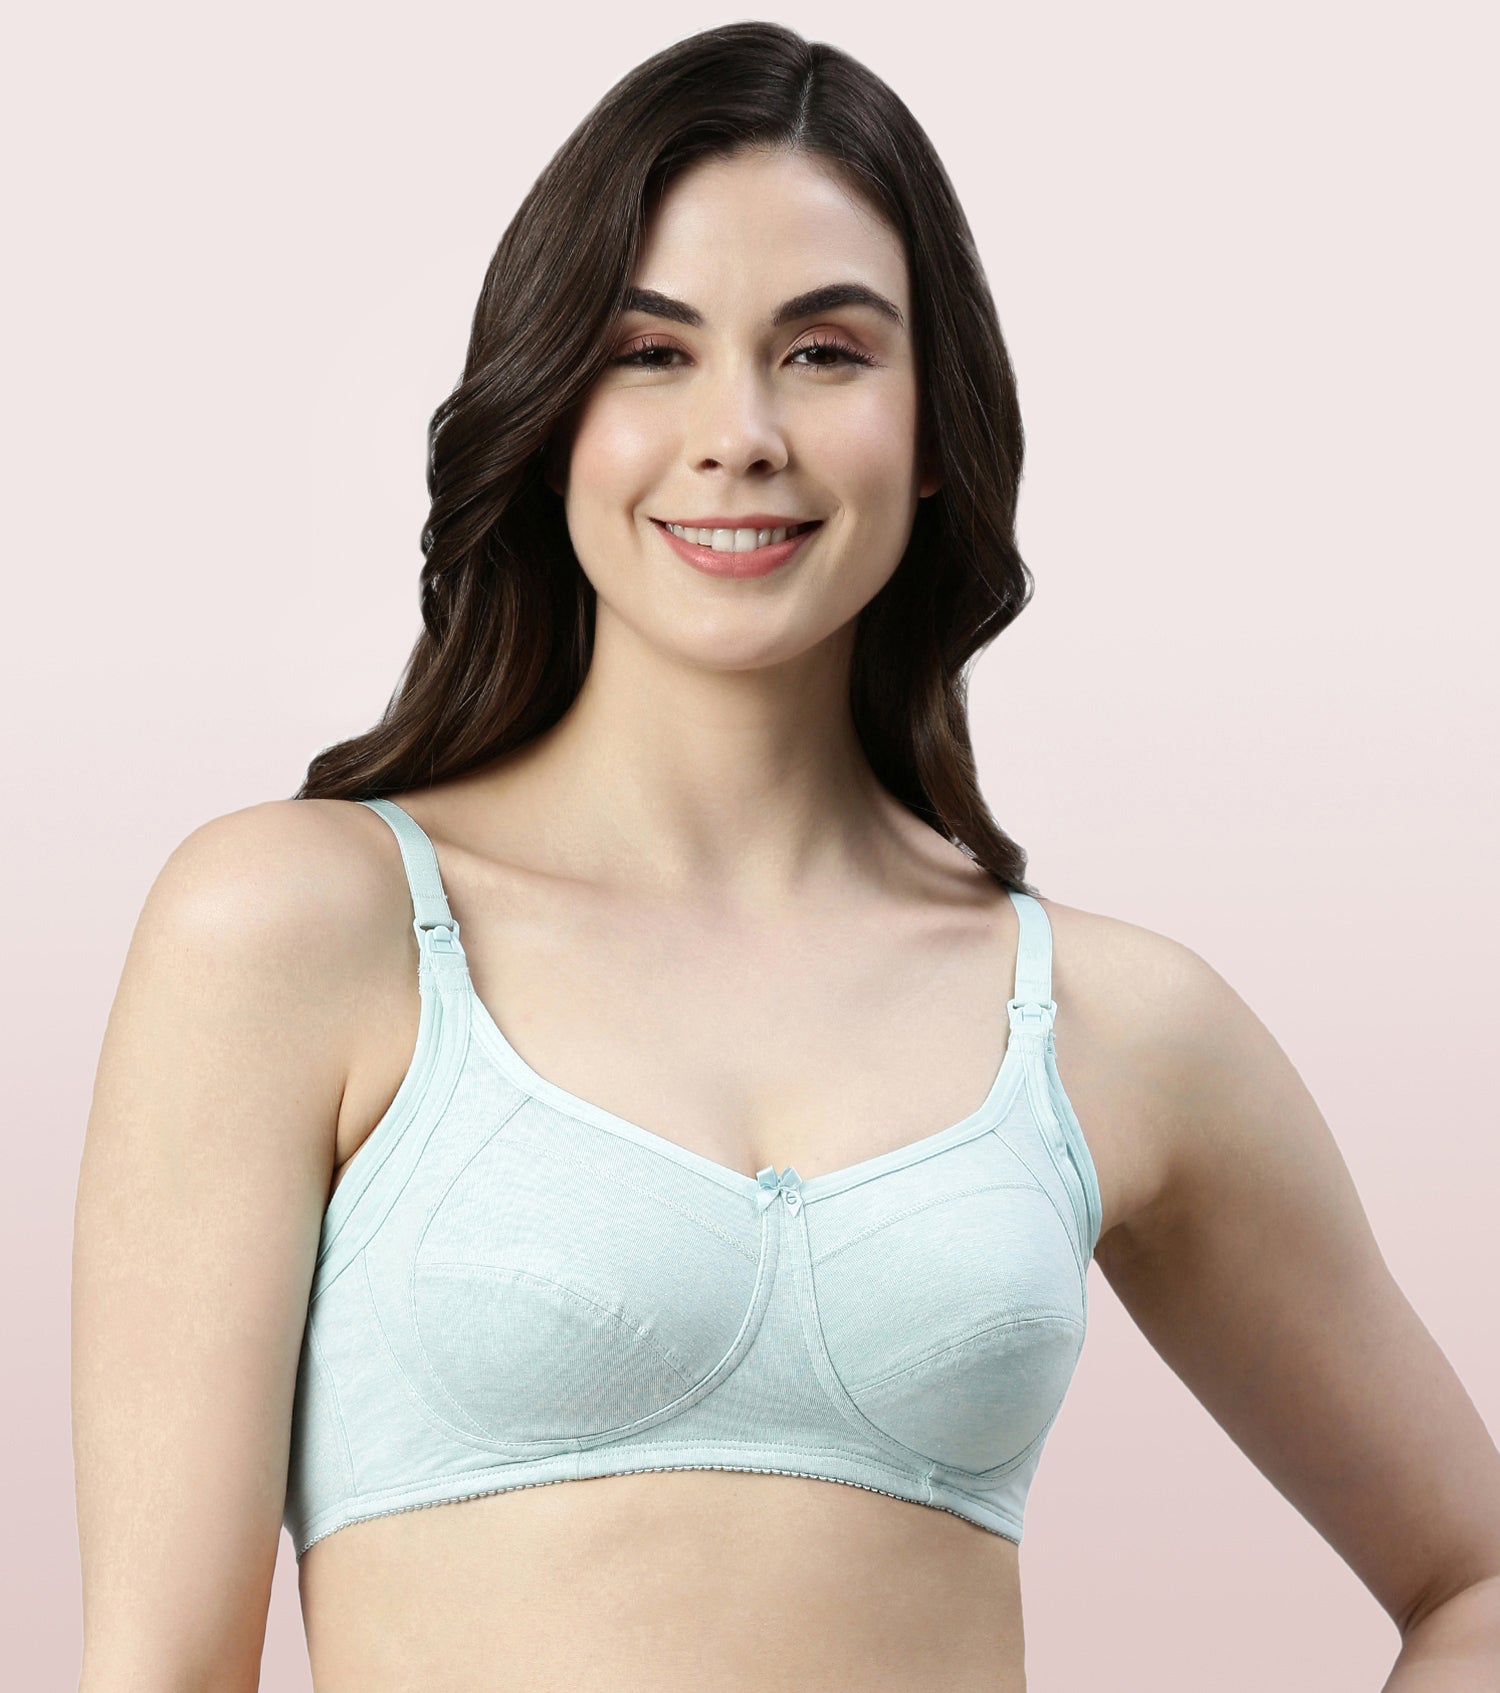 Cilory.com - The summer calls for cool and comfy designs, like this cotton  stretch bra in exotic colours featuring fashionable vintage bow-prints on  triangular cups. Buy now- .com/padded/48514-enamor-padded-non-wired-medium-coverage-bra